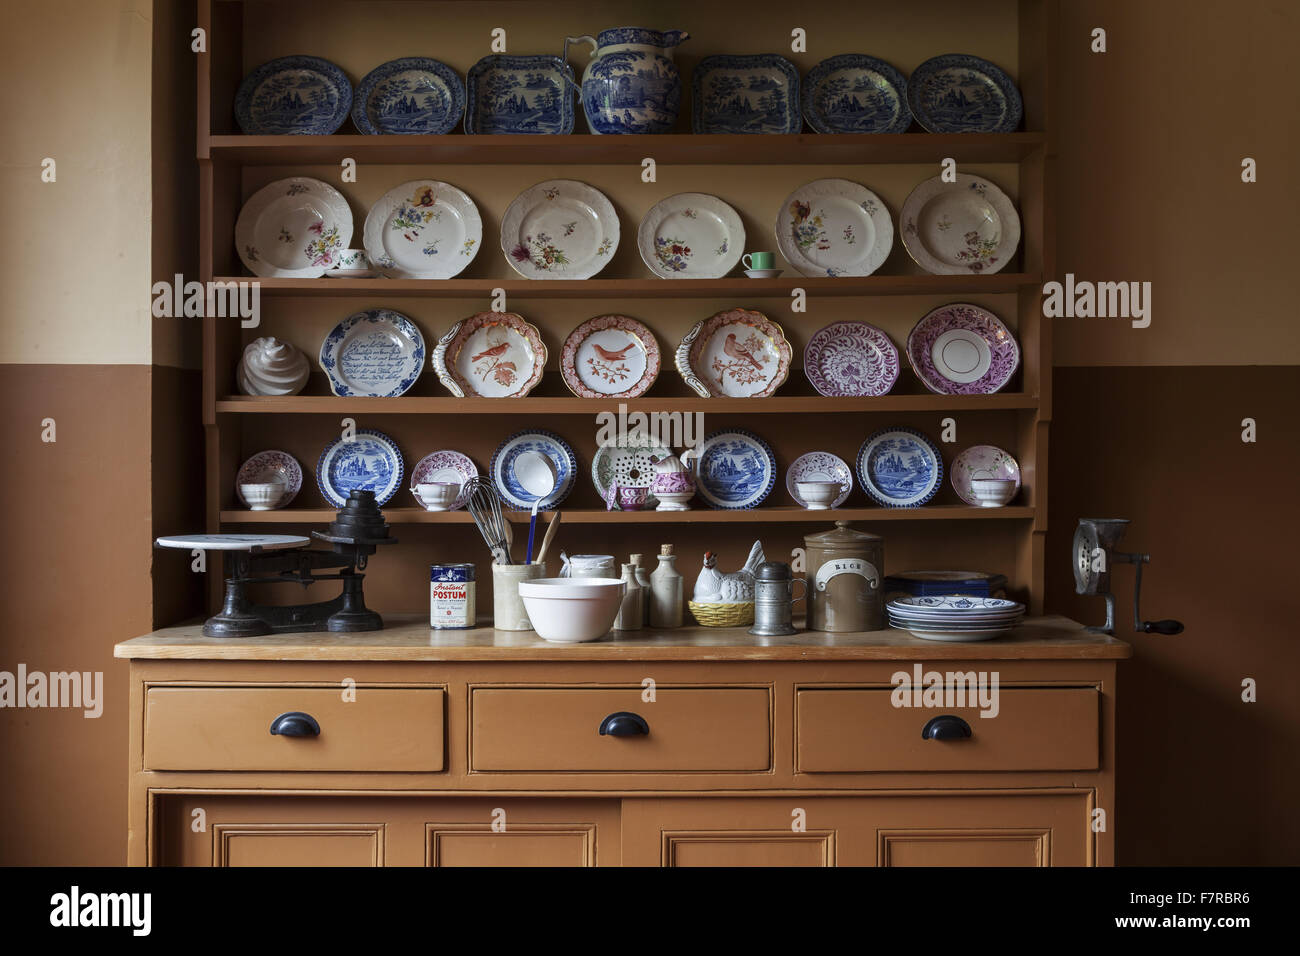 Crockery And Cooking Utensils Displayed On The Kitchen Dresser At